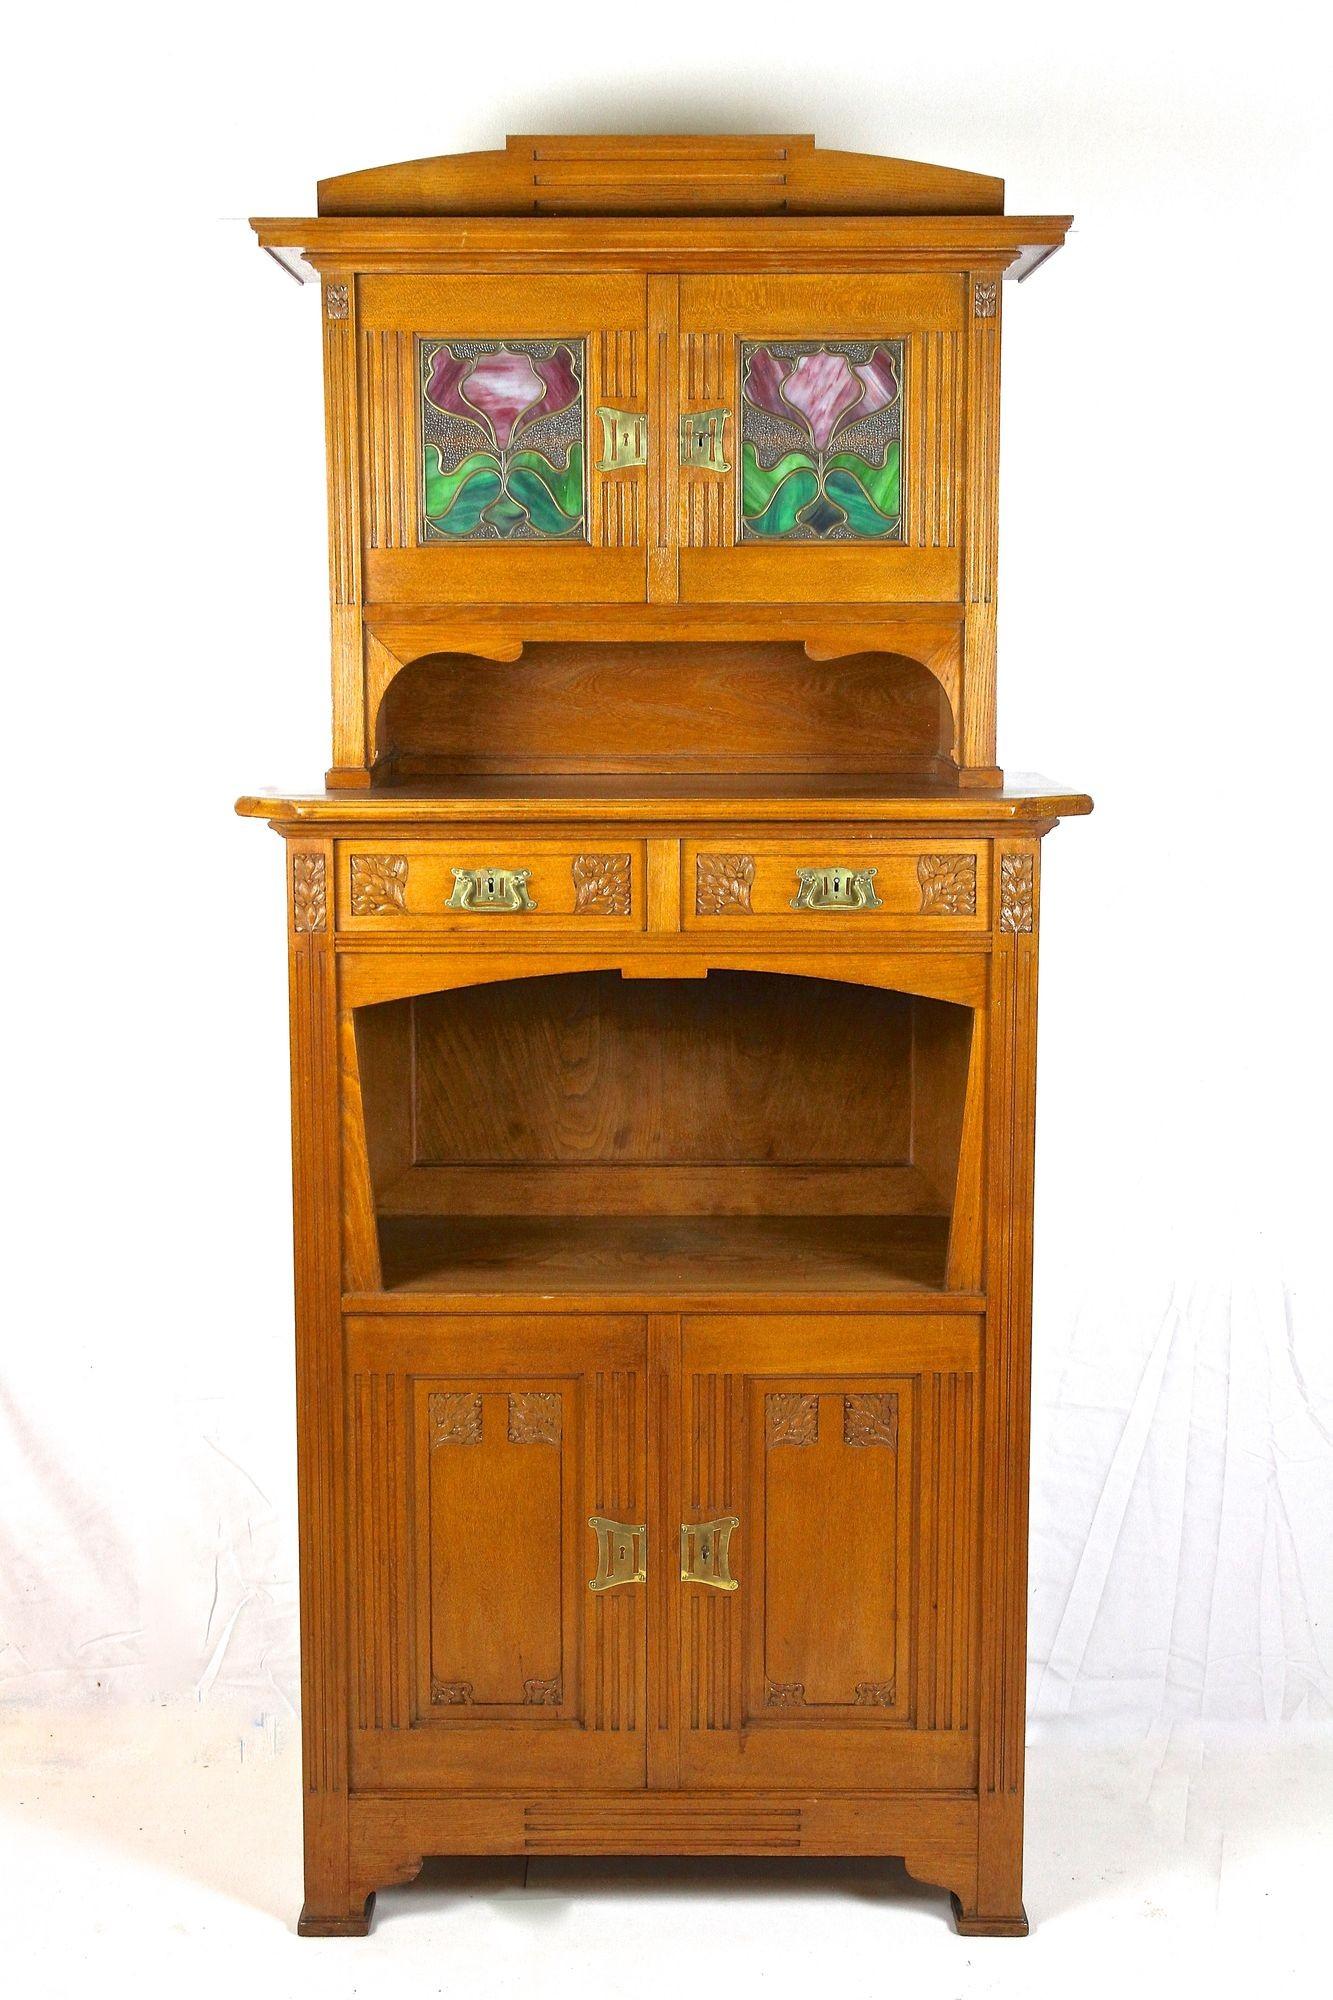 Absolutely charming oakwood Art Nouveau cabinet or buffet originating from period in Austria around 1910. Consisting of two parts, the lower part (reminds a bit of a half cabinet) offers two drawers, a great designed open compartment and two doors.